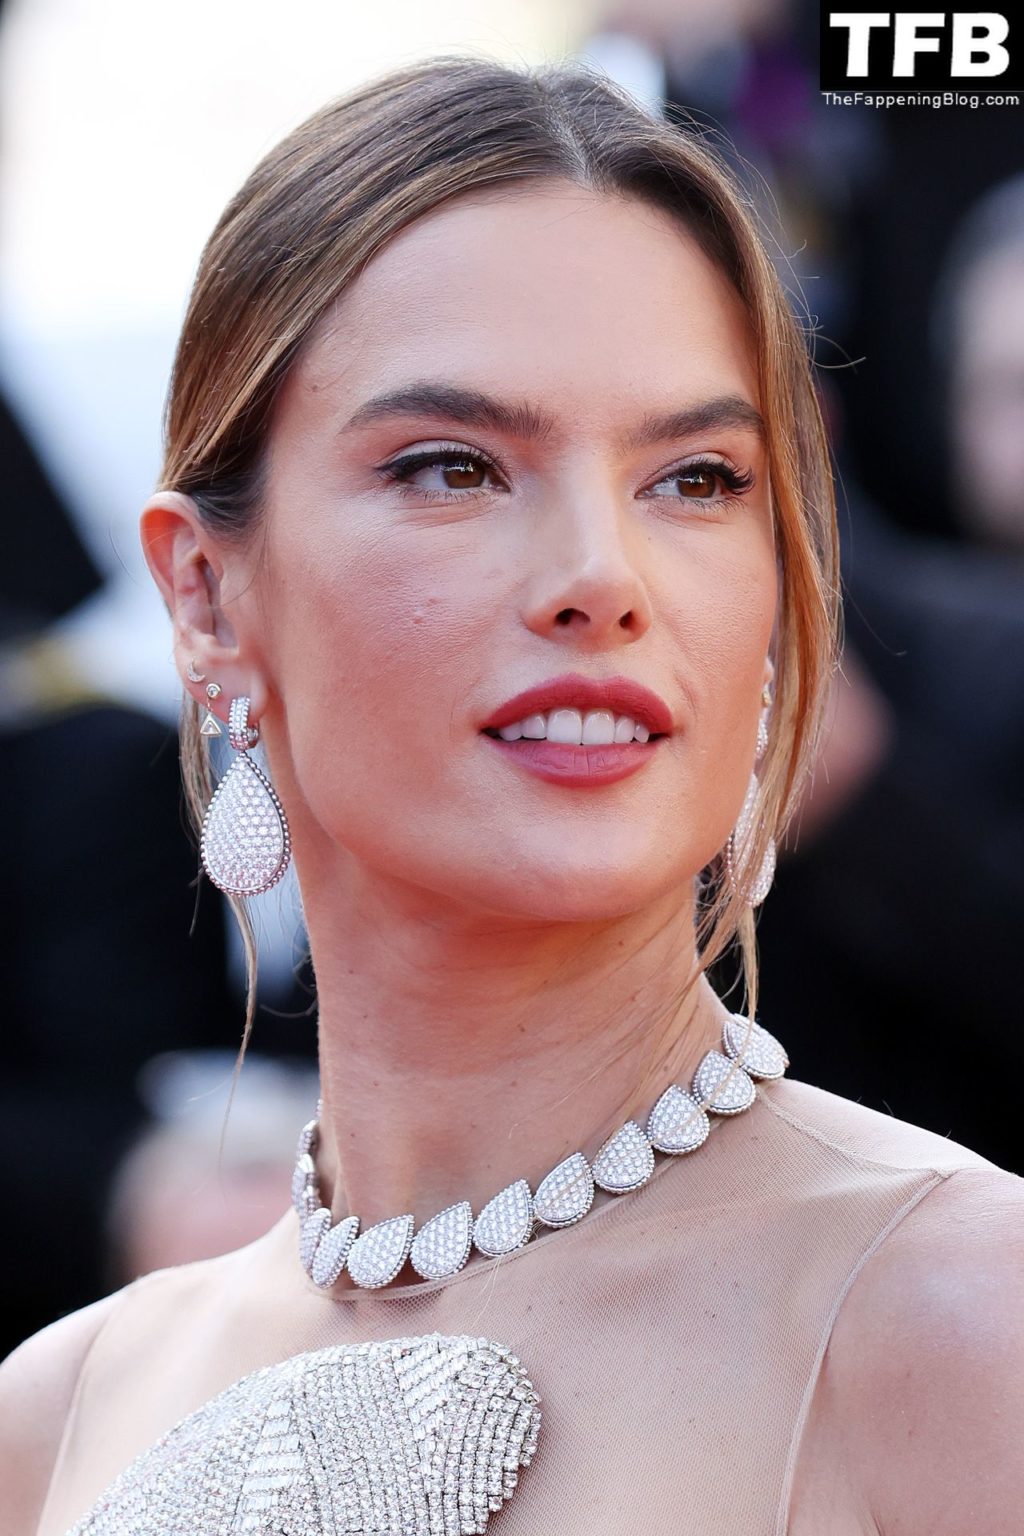 Alessandra Ambrosio Sexy The Fappening Blog 76 1024x1536 - Alessandra Ambrosio Poses Braless as She Attends the Screening of “Armageddon Time” During the 75th Annual Cannes Film Festival (150 Photos)